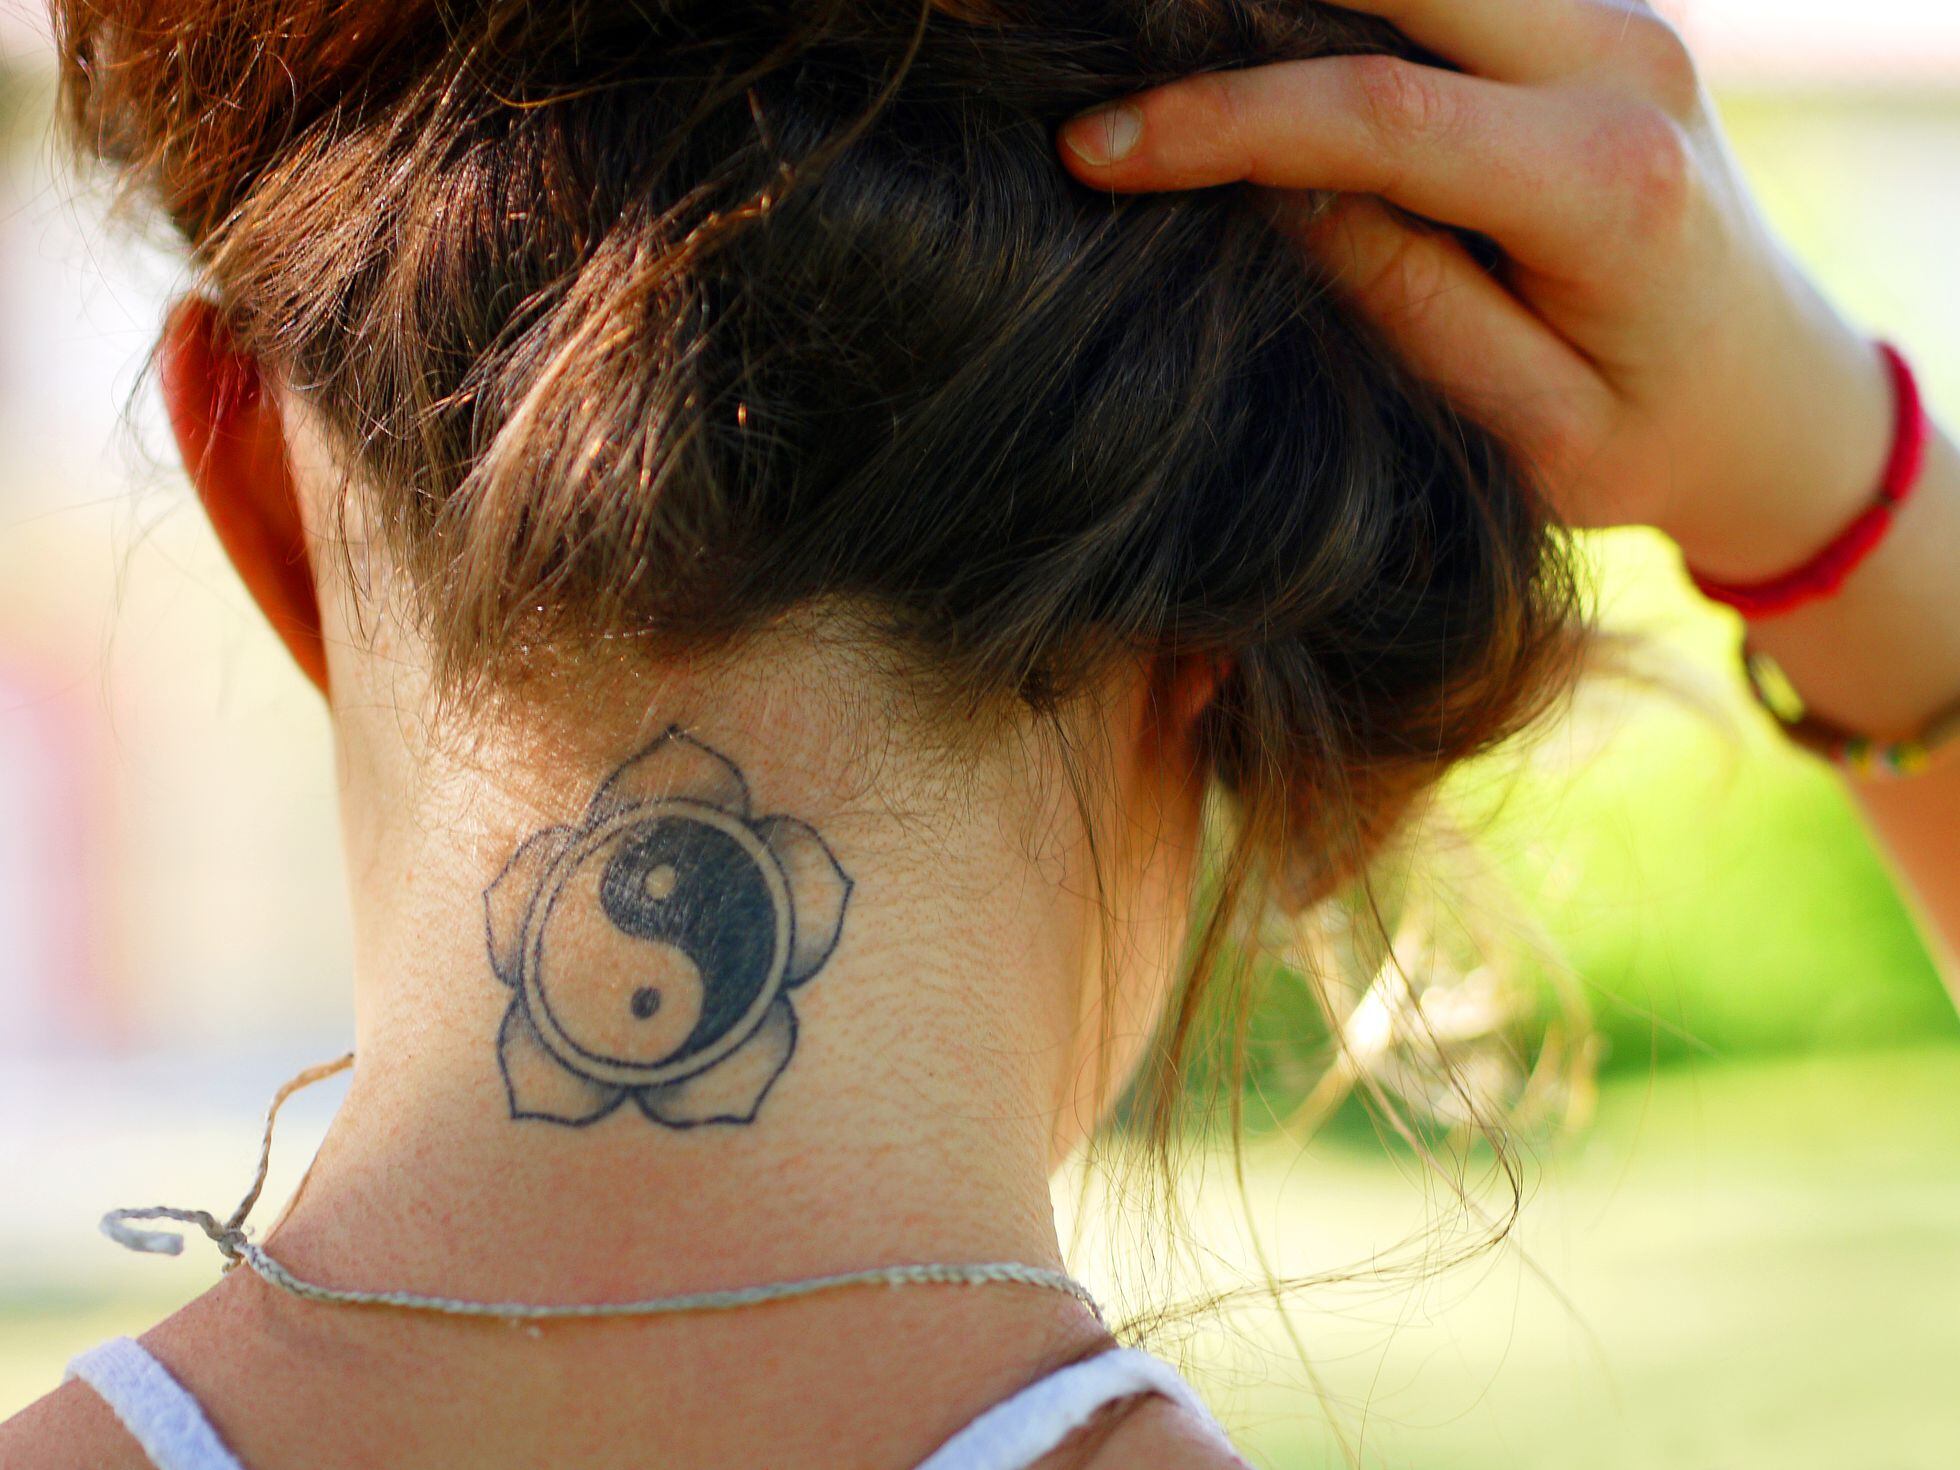 My teen wants to get a tattoo. What should I do? | Society | EL PAÍS  English Edition